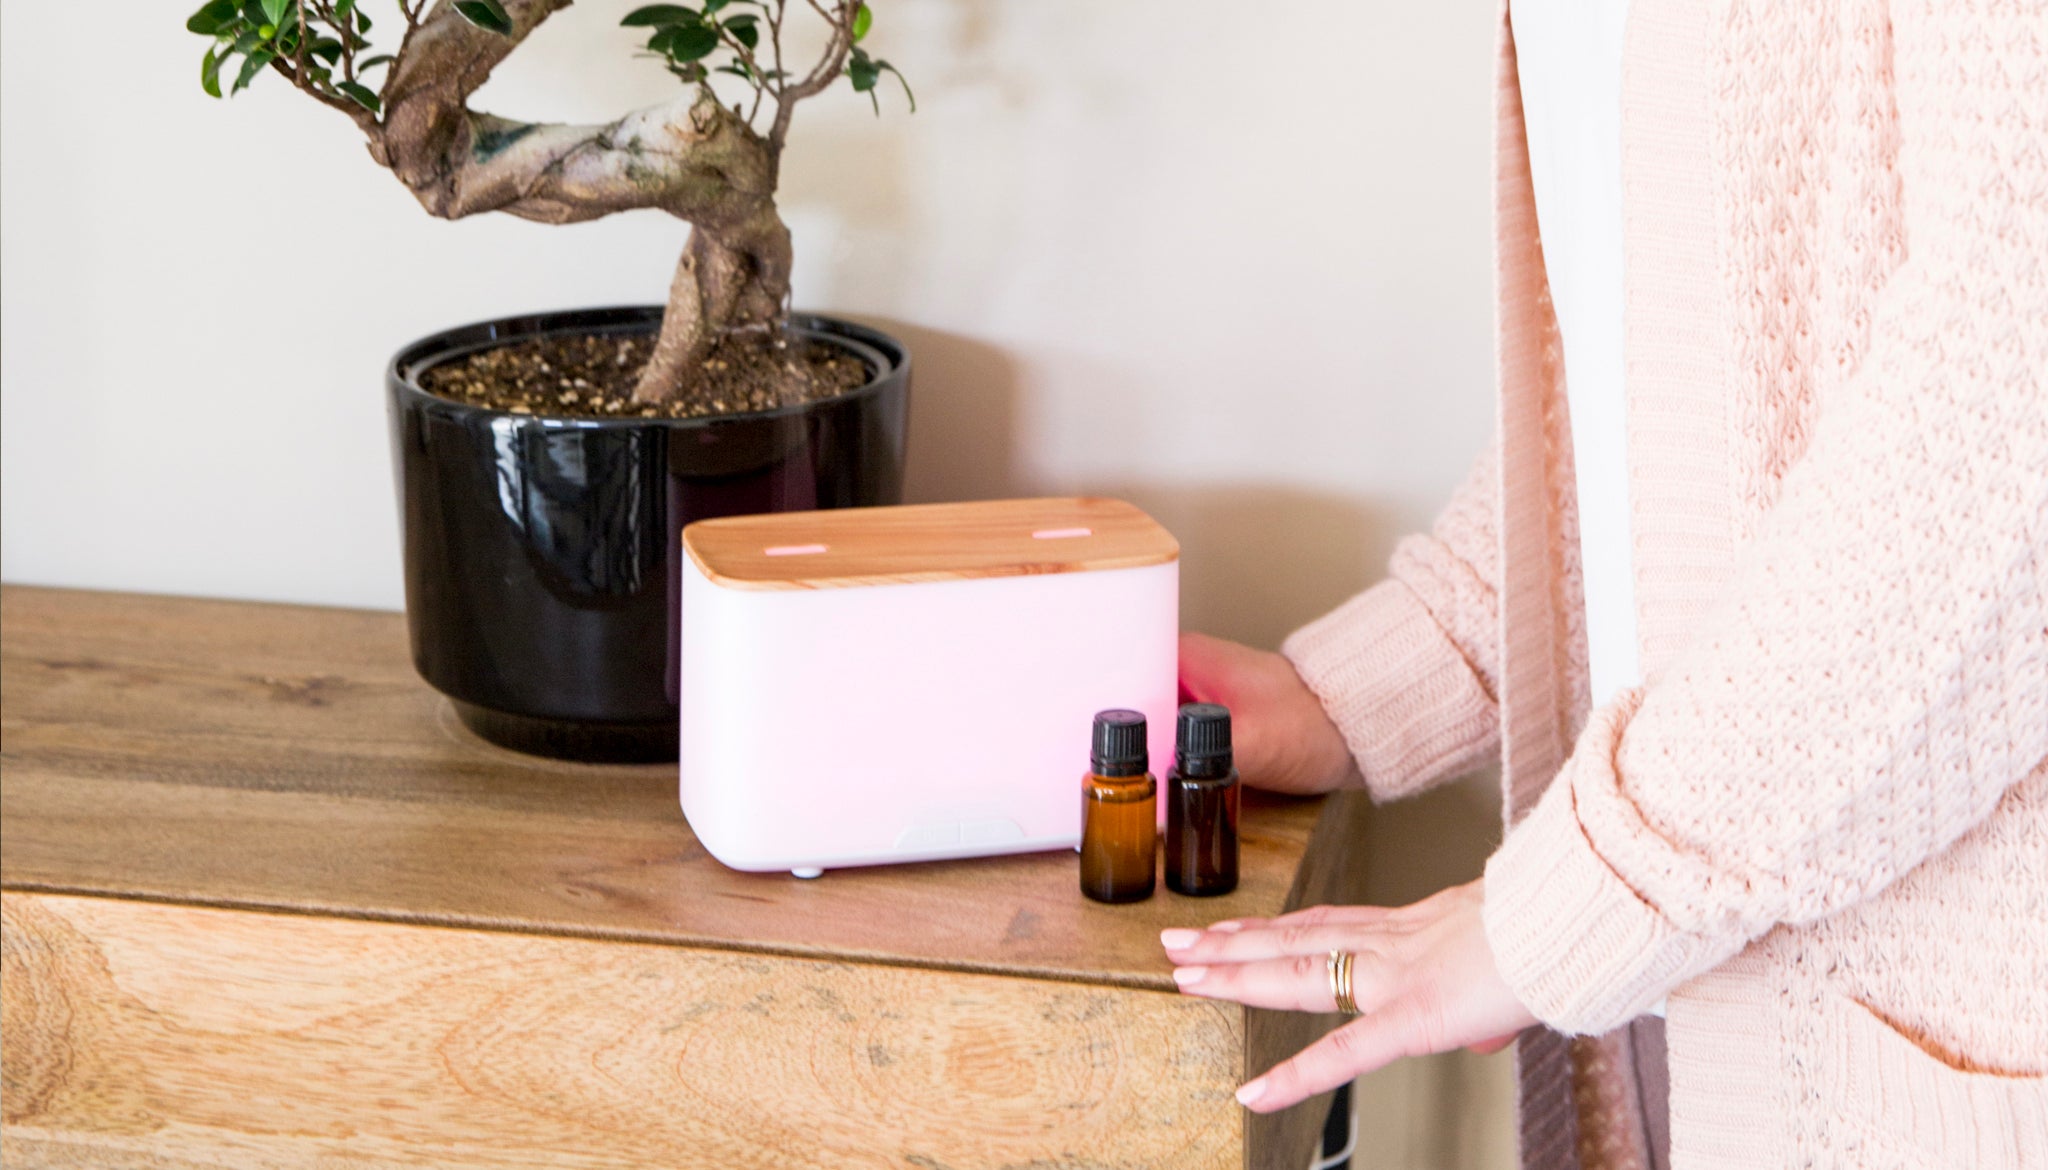 How to Clean Your Diffuser for Essential Oils